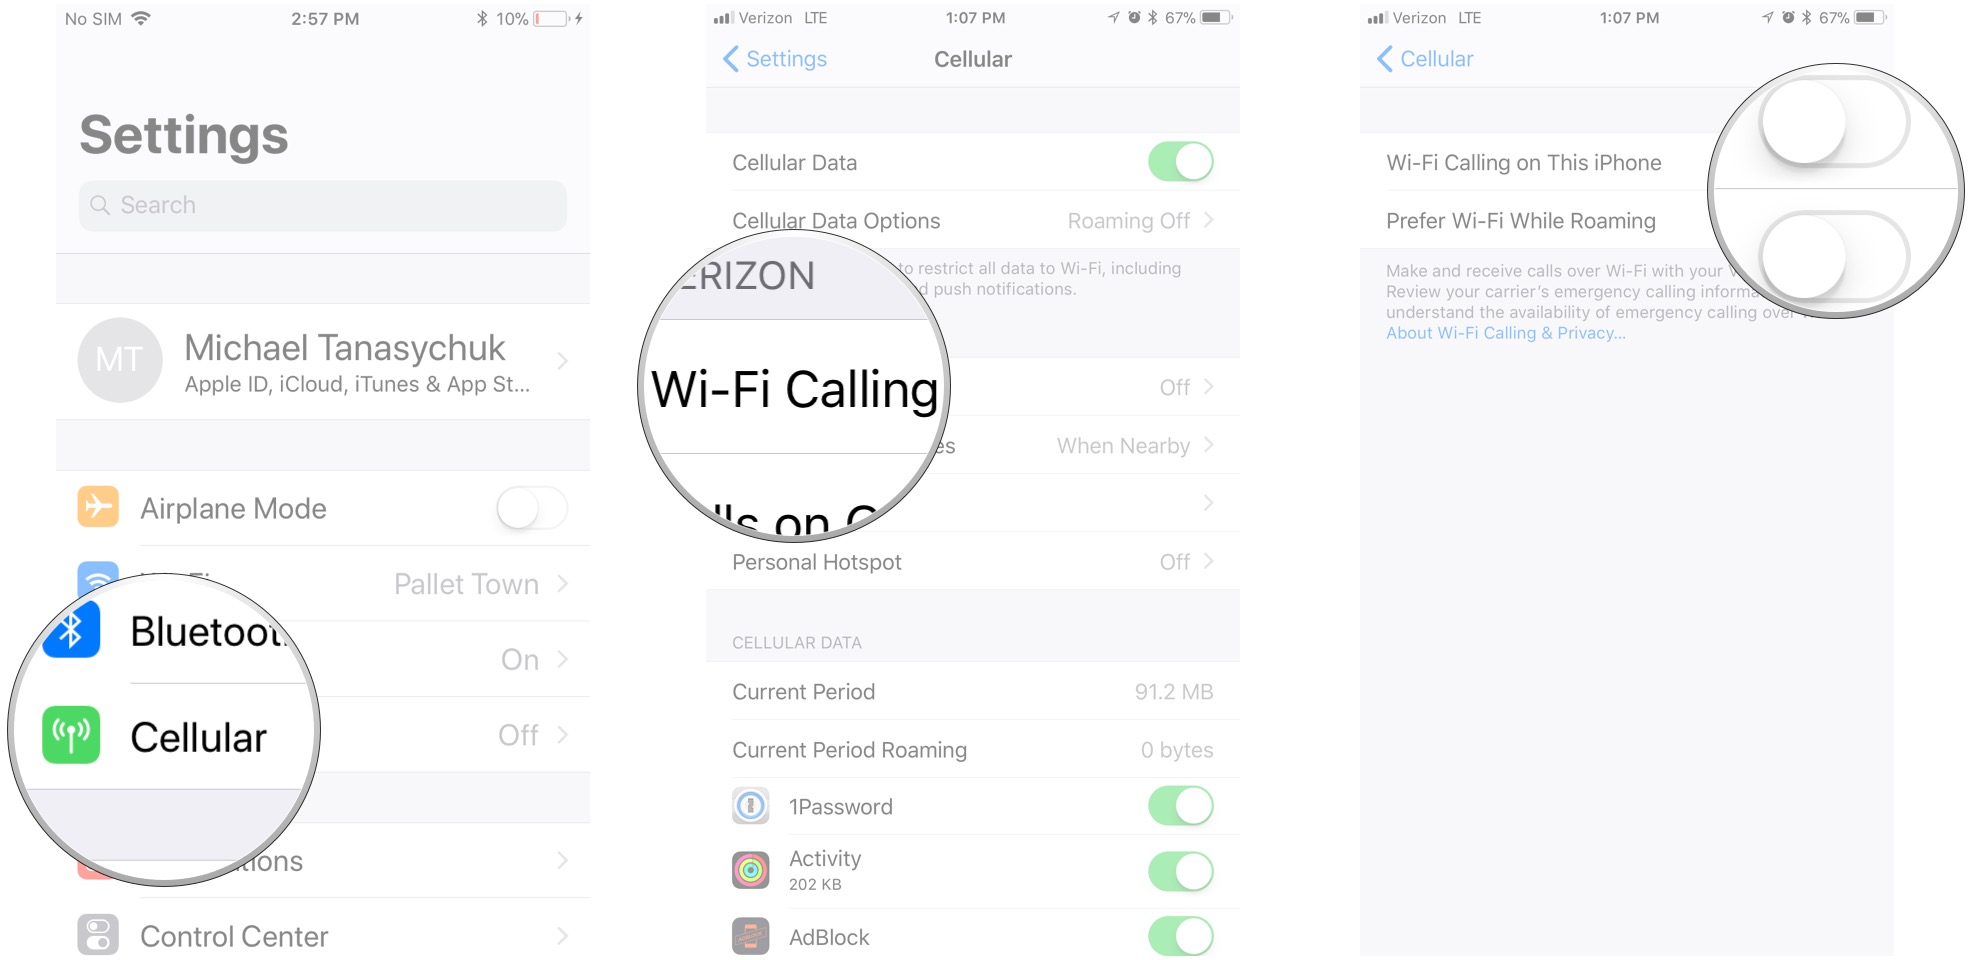 Tap Cellular, tap Wi-Fi Calling, tap the switches